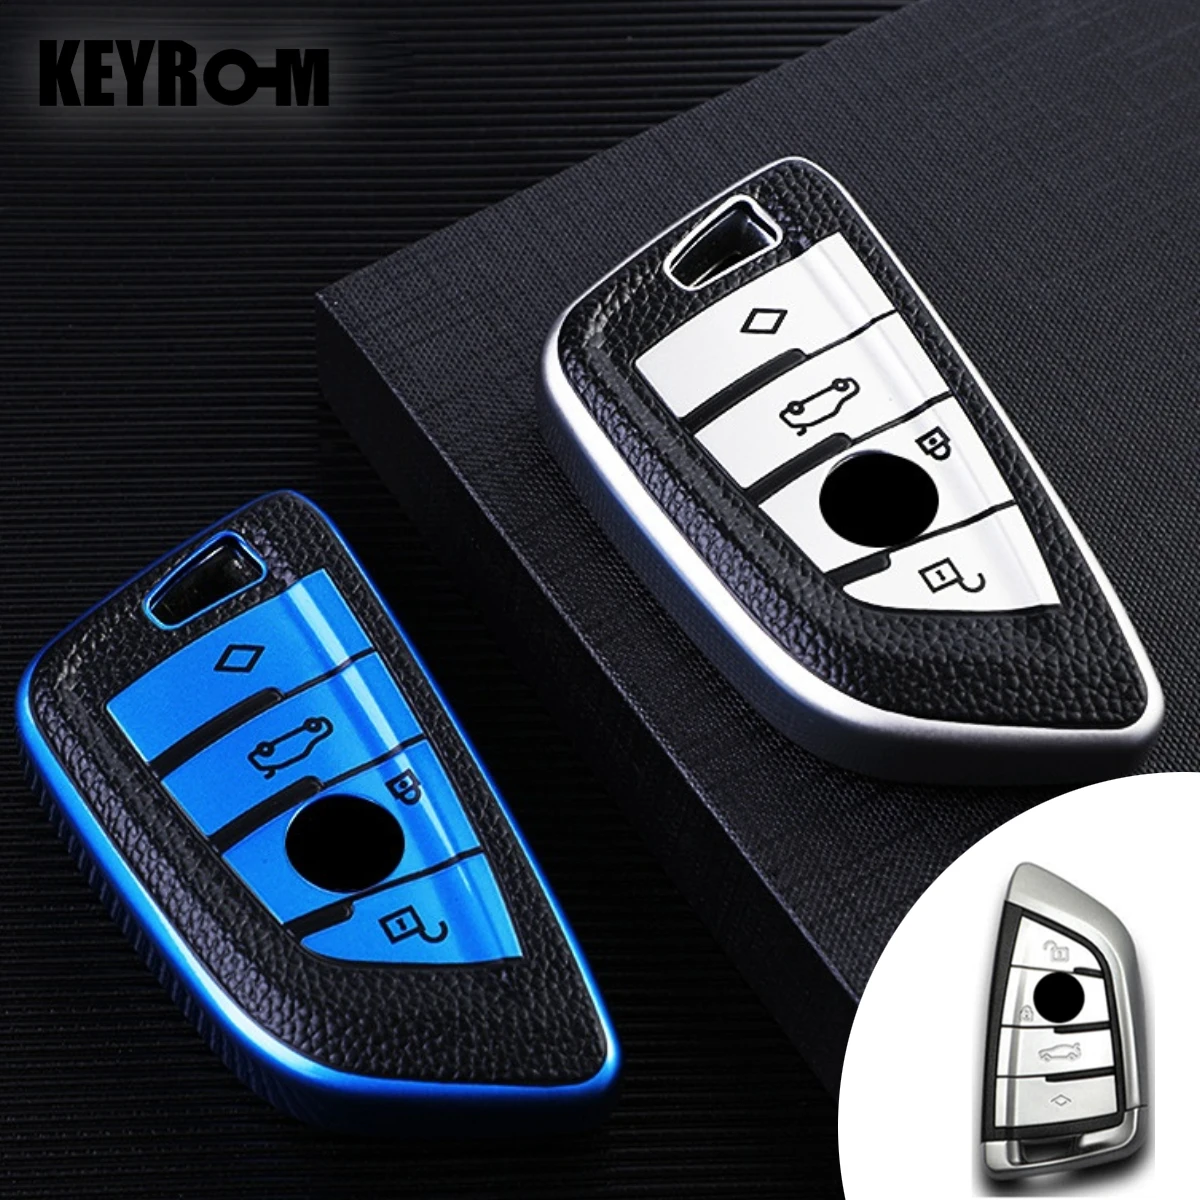 Leather Car Key Case Full Cover for BMW F30 F11 X3 F25 Serie 1 E39 X4 G20 X5 G05 F40 X6 F44 216 X1 G30 320i Protection Shell Bag